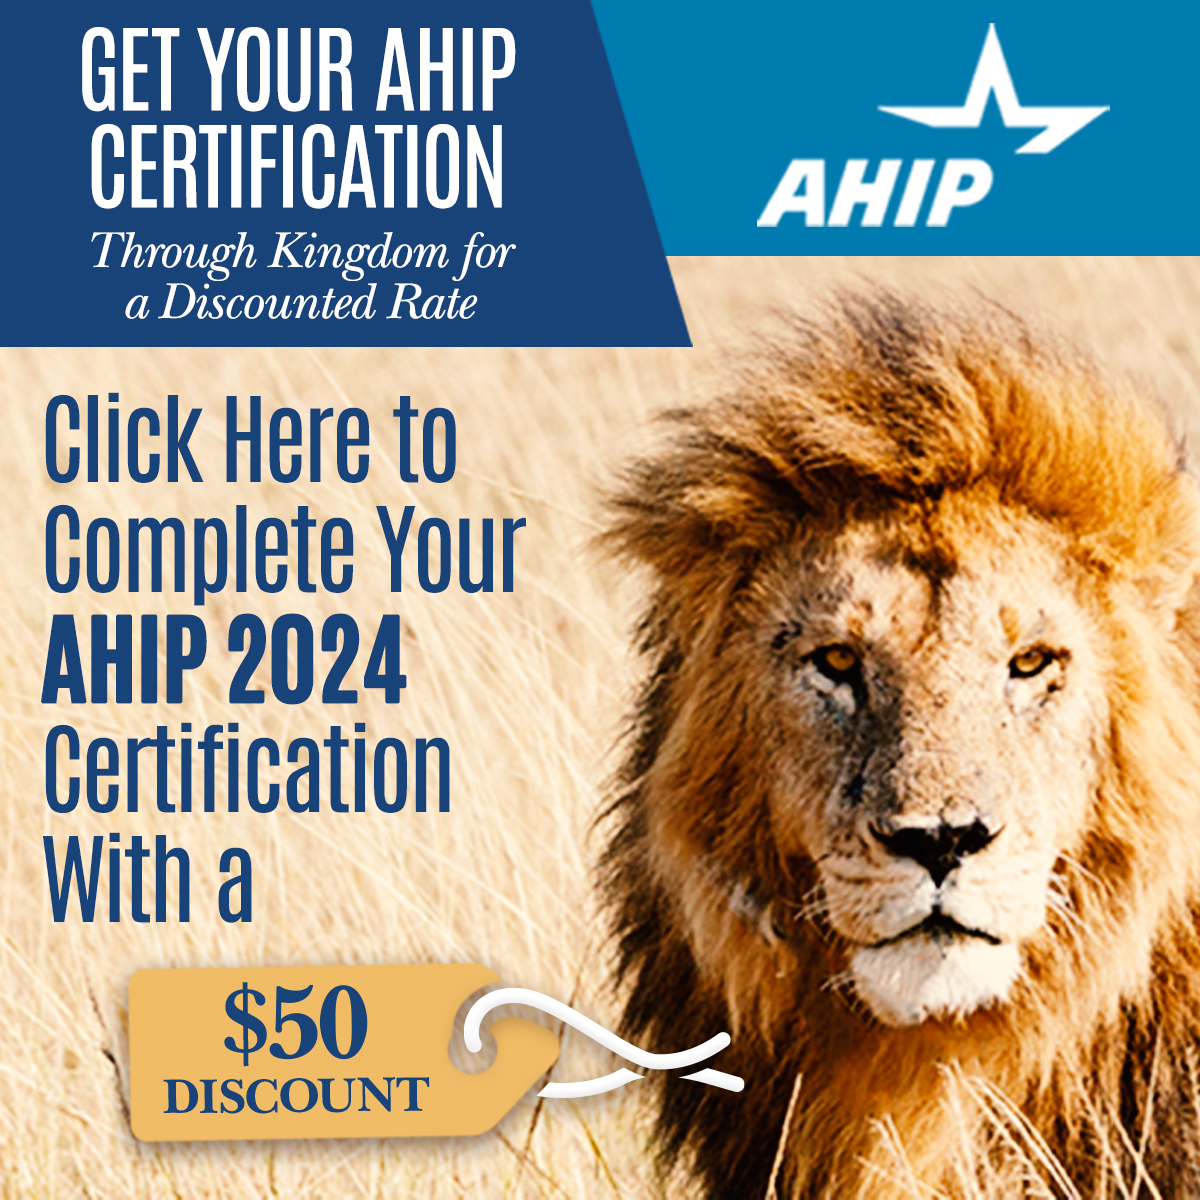 Get your AHIP certification through Kingdom for a discount rate. Click here to complete your AHIP 2024 certification with a $50 discount.